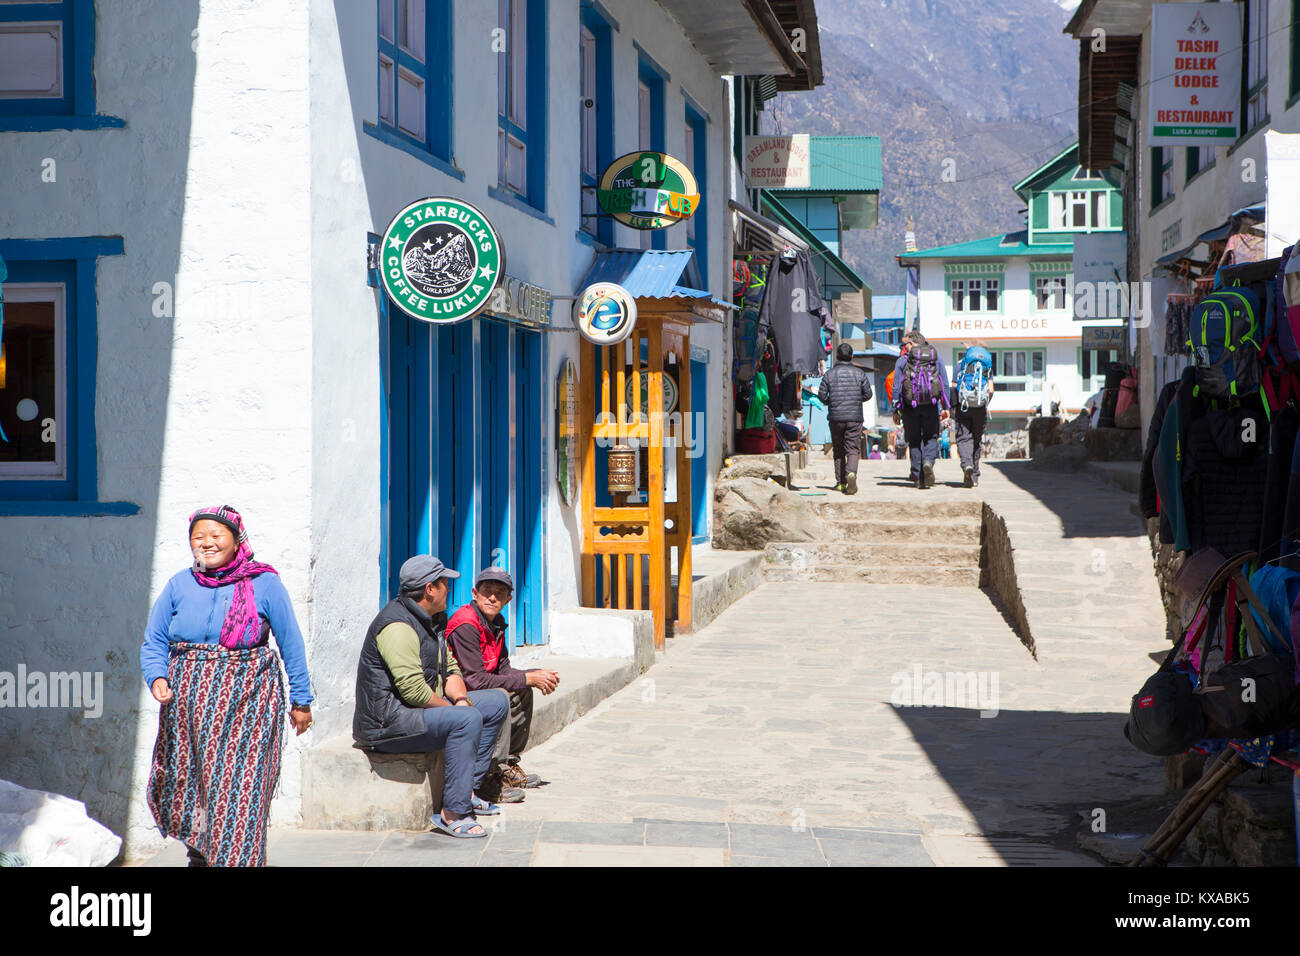 Street view of Lukla, a mountain village in the Nepalese Himalaya and starting point of the famous multi day Everest Base Camp trek through the Khumbu Valley. Stock Photo